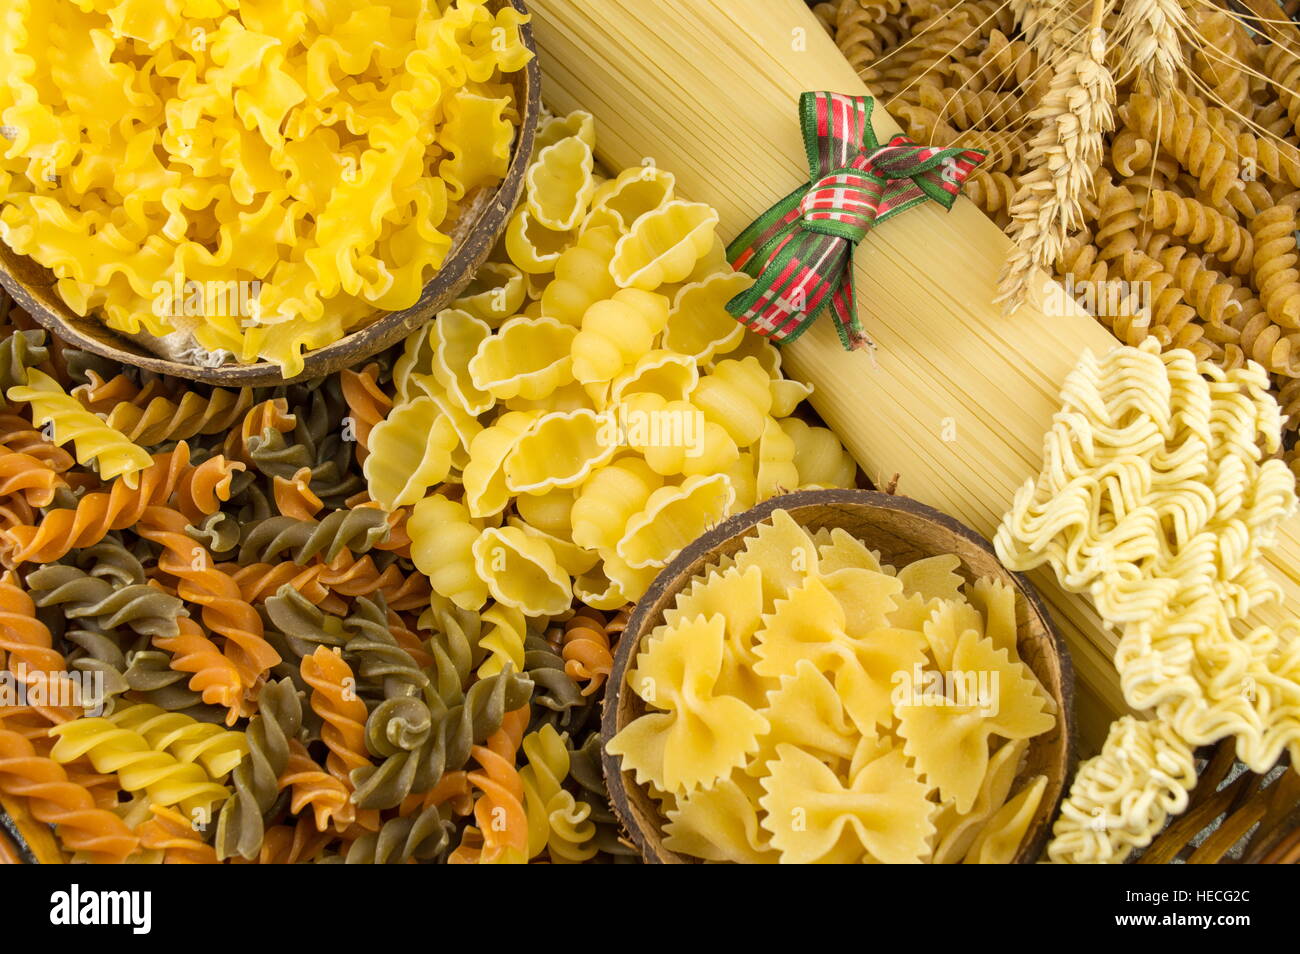 different types of uncooked pasta on a pile Stock Photo